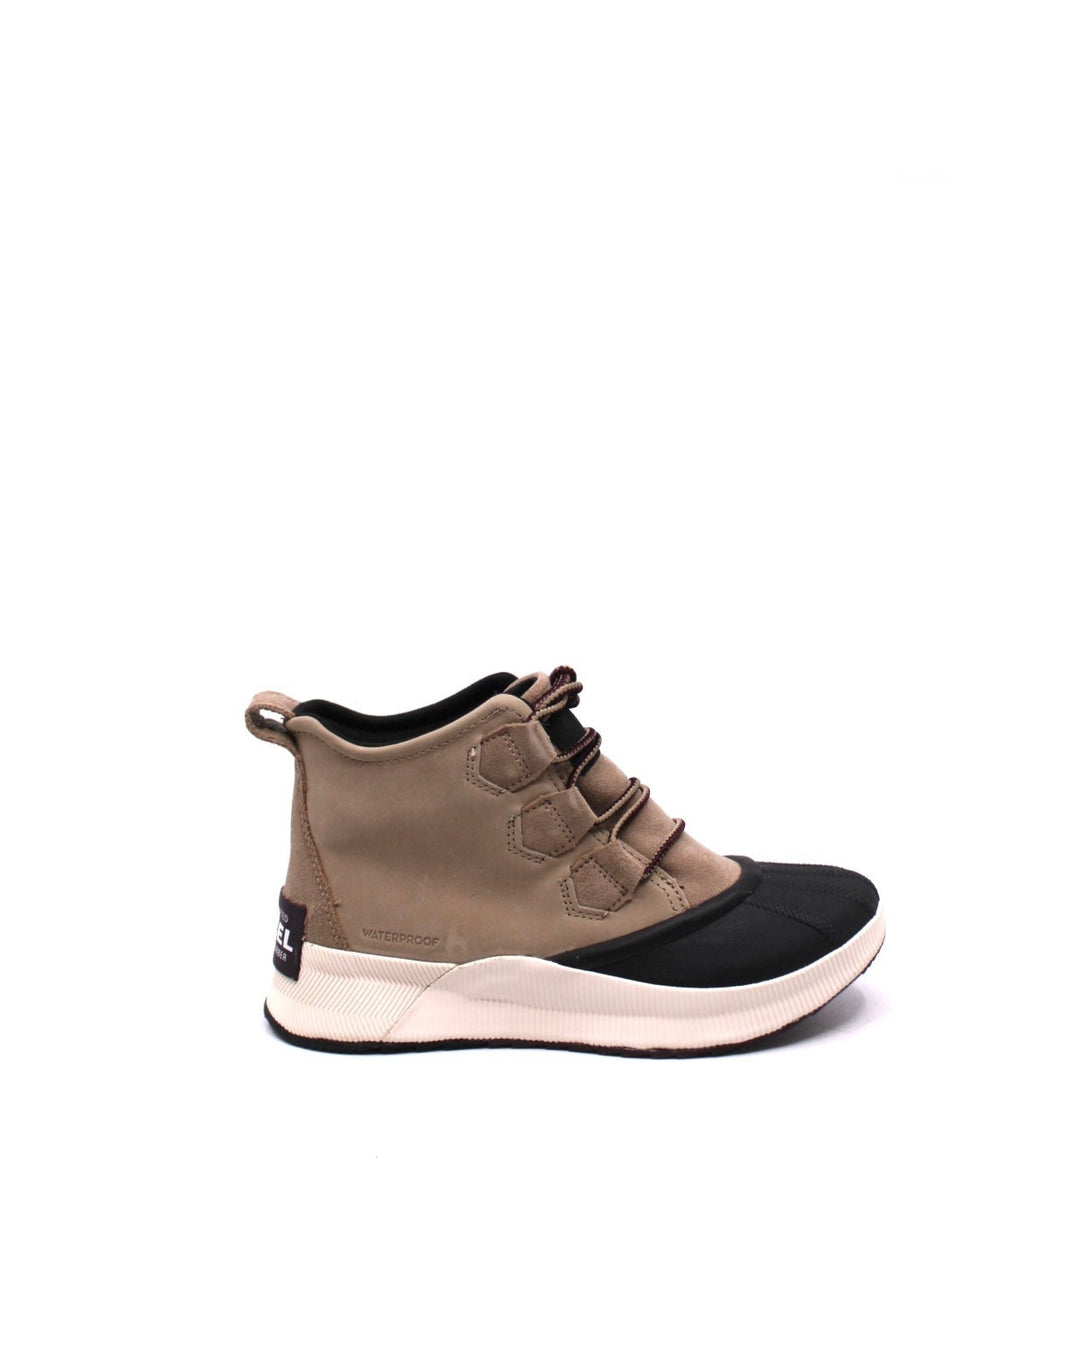 Sorel Out 'N About III Classic Omega Taupe/Black - Dear Lucy